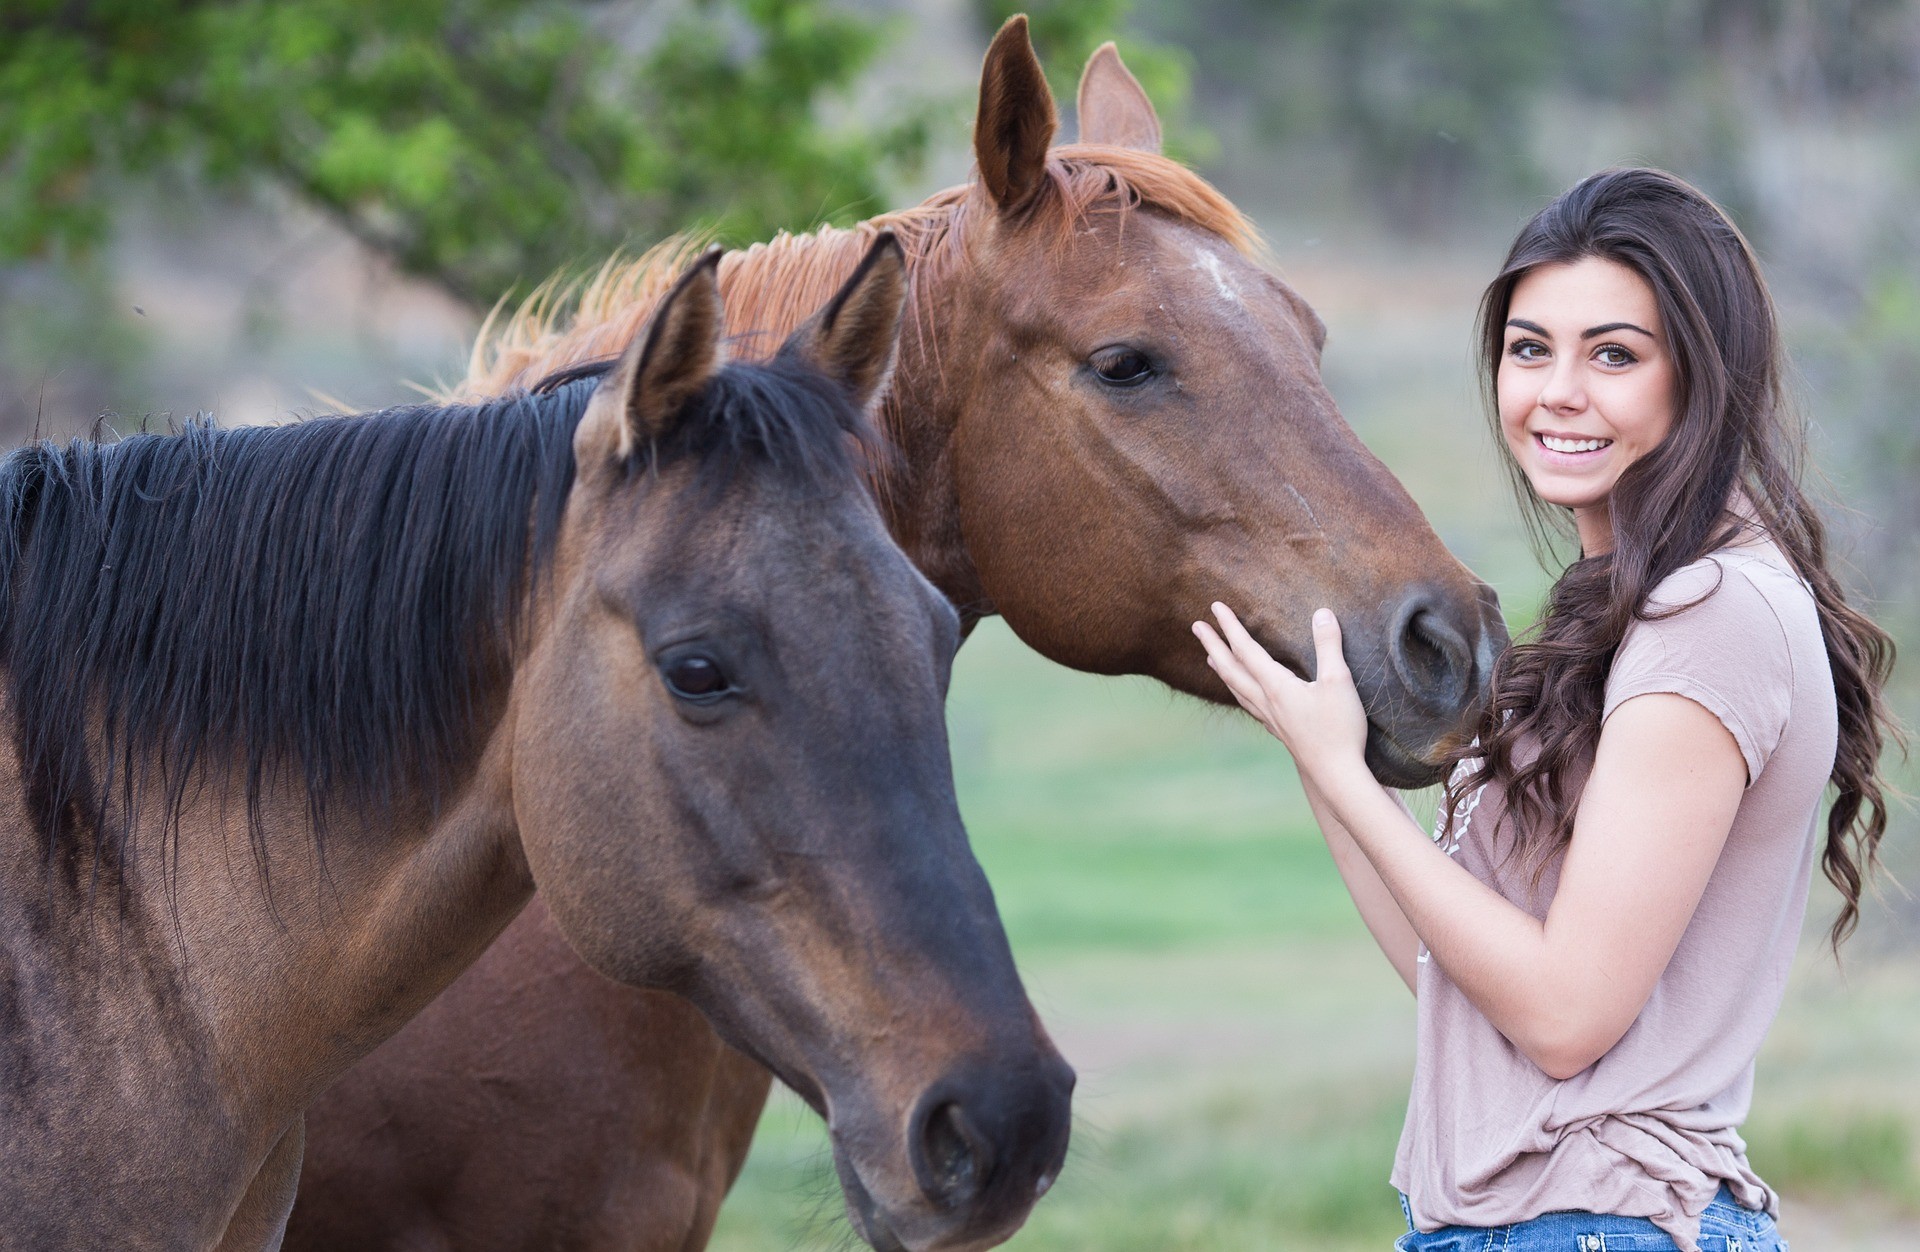 Passion for horses: one day in a farm!